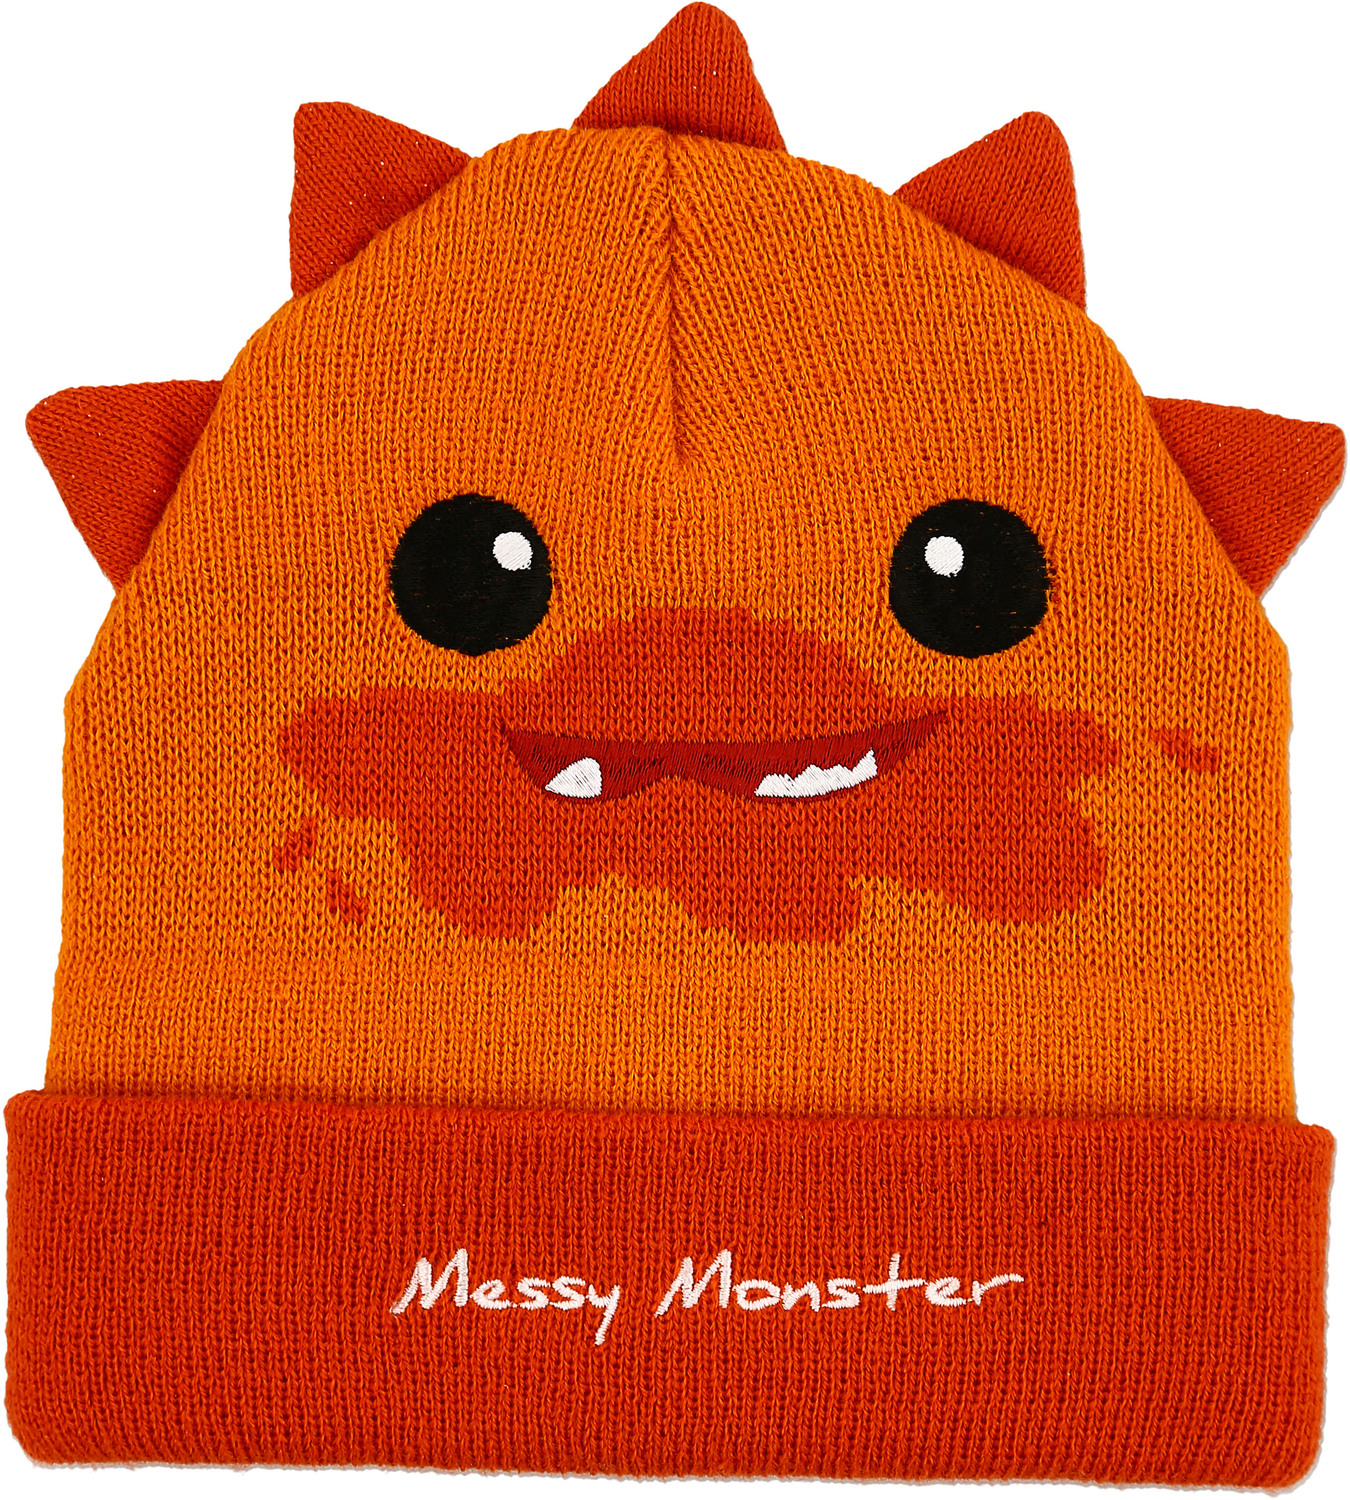 Orange Messy Monster by Monster Munchkins - Orange Messy Monster - One Size Fits All Baby Hat